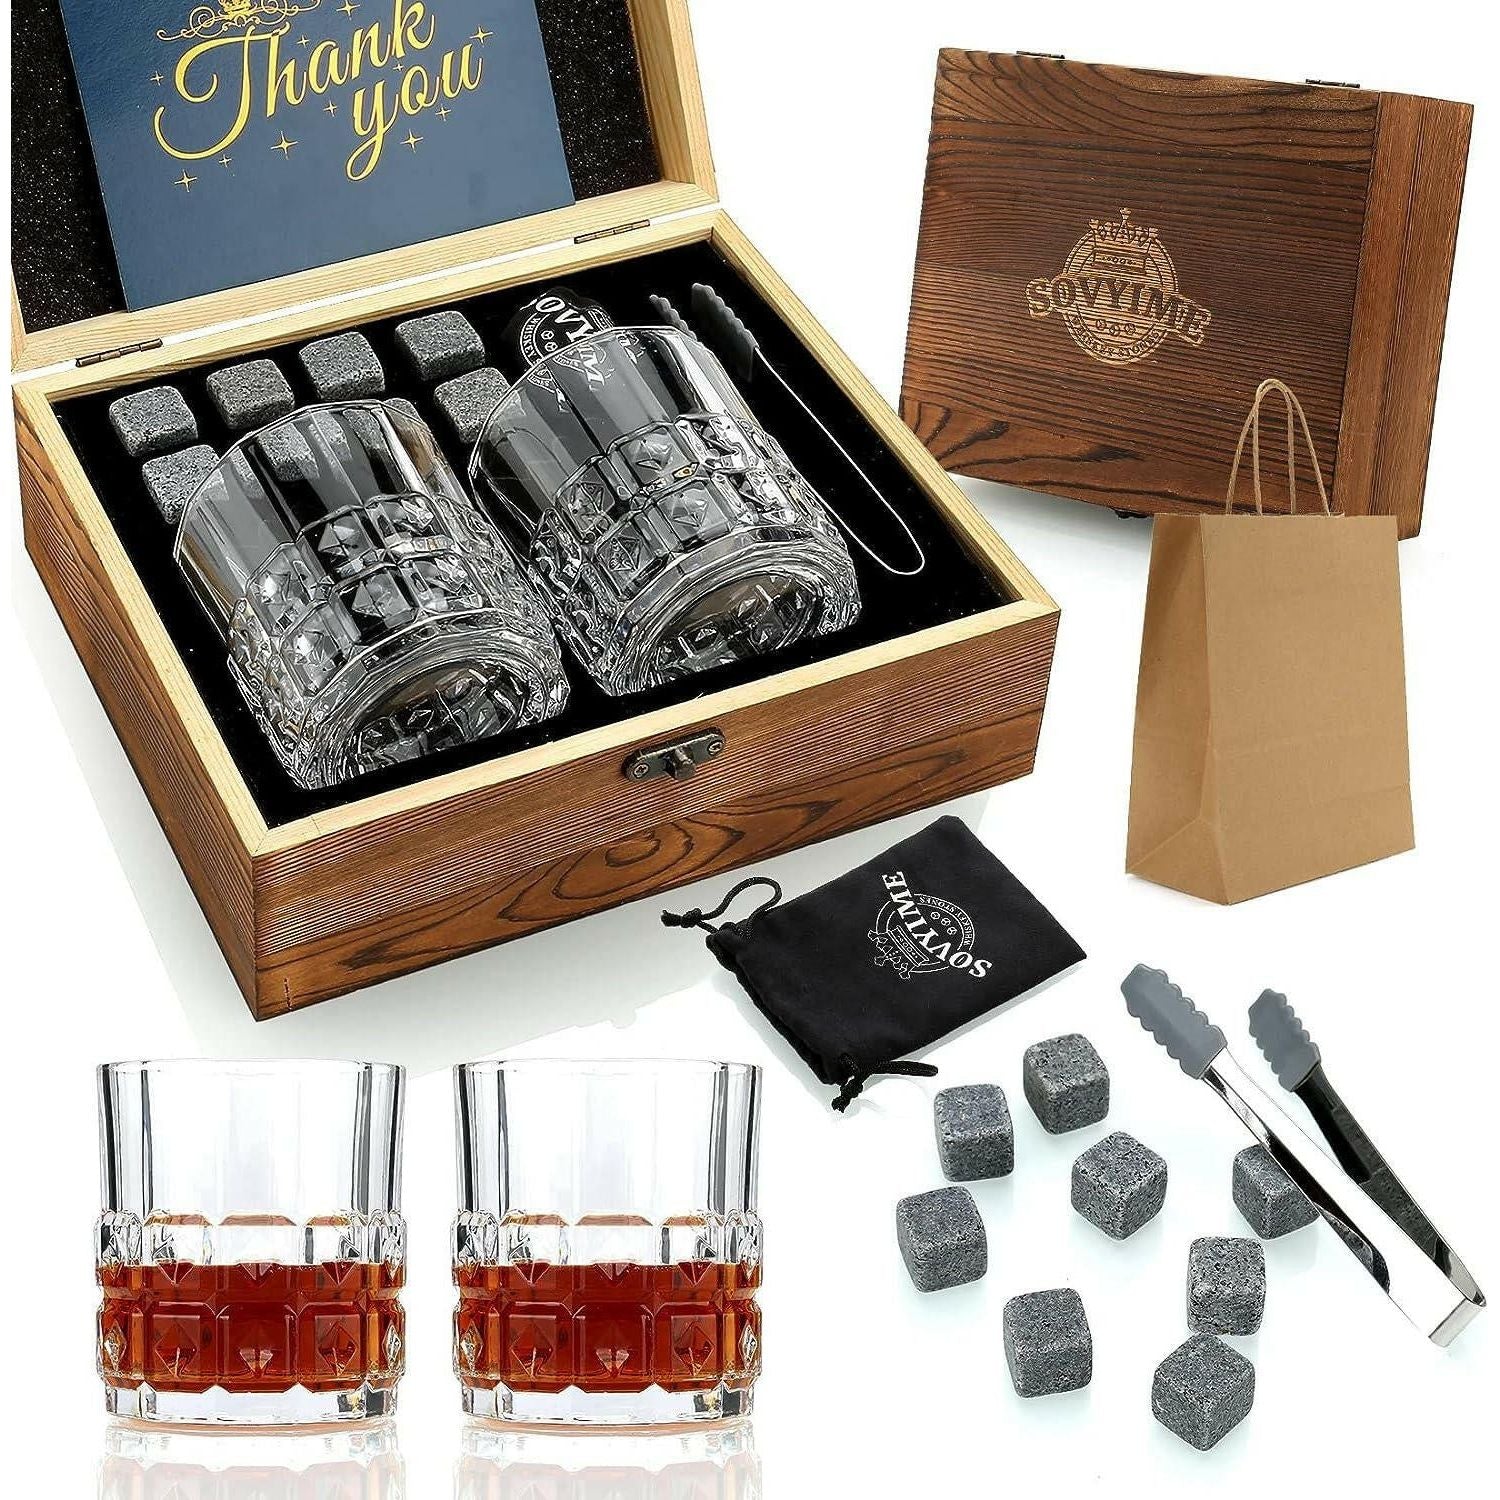 Whiskey Stones Gifts for Men, Groomsmen Gifts, Granite Chilling Stones Bourbon Whiskey Glasses Set, Unique Birthday Gifts for Men Christmas Father's Day Valentine Retirement - The European Gift Store